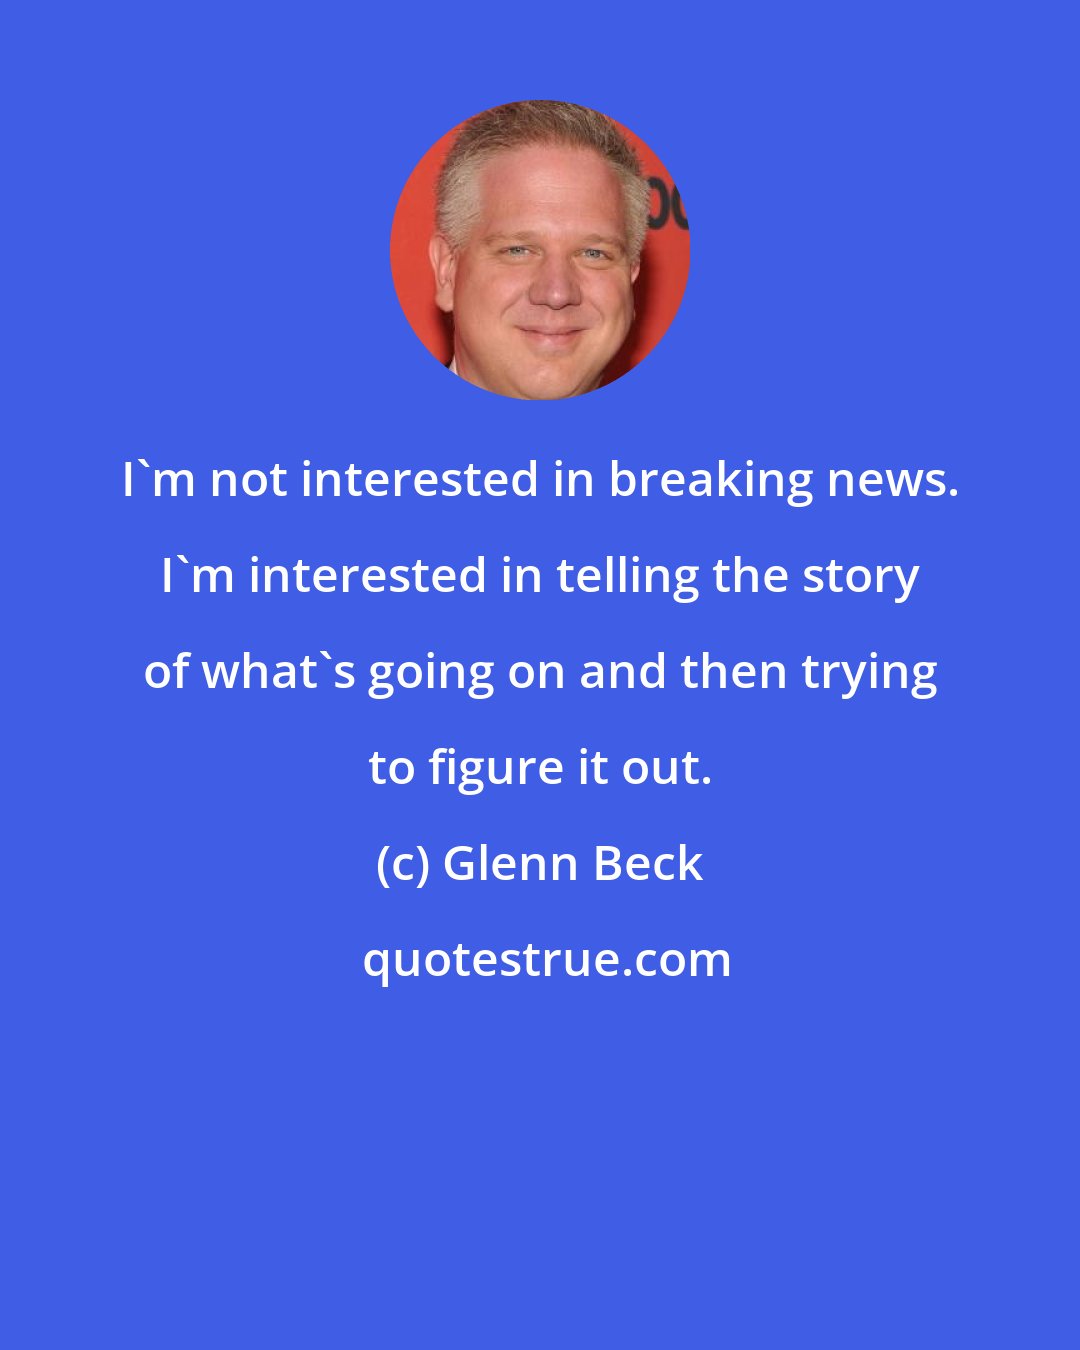 Glenn Beck: I'm not interested in breaking news. I'm interested in telling the story of what's going on and then trying to figure it out.